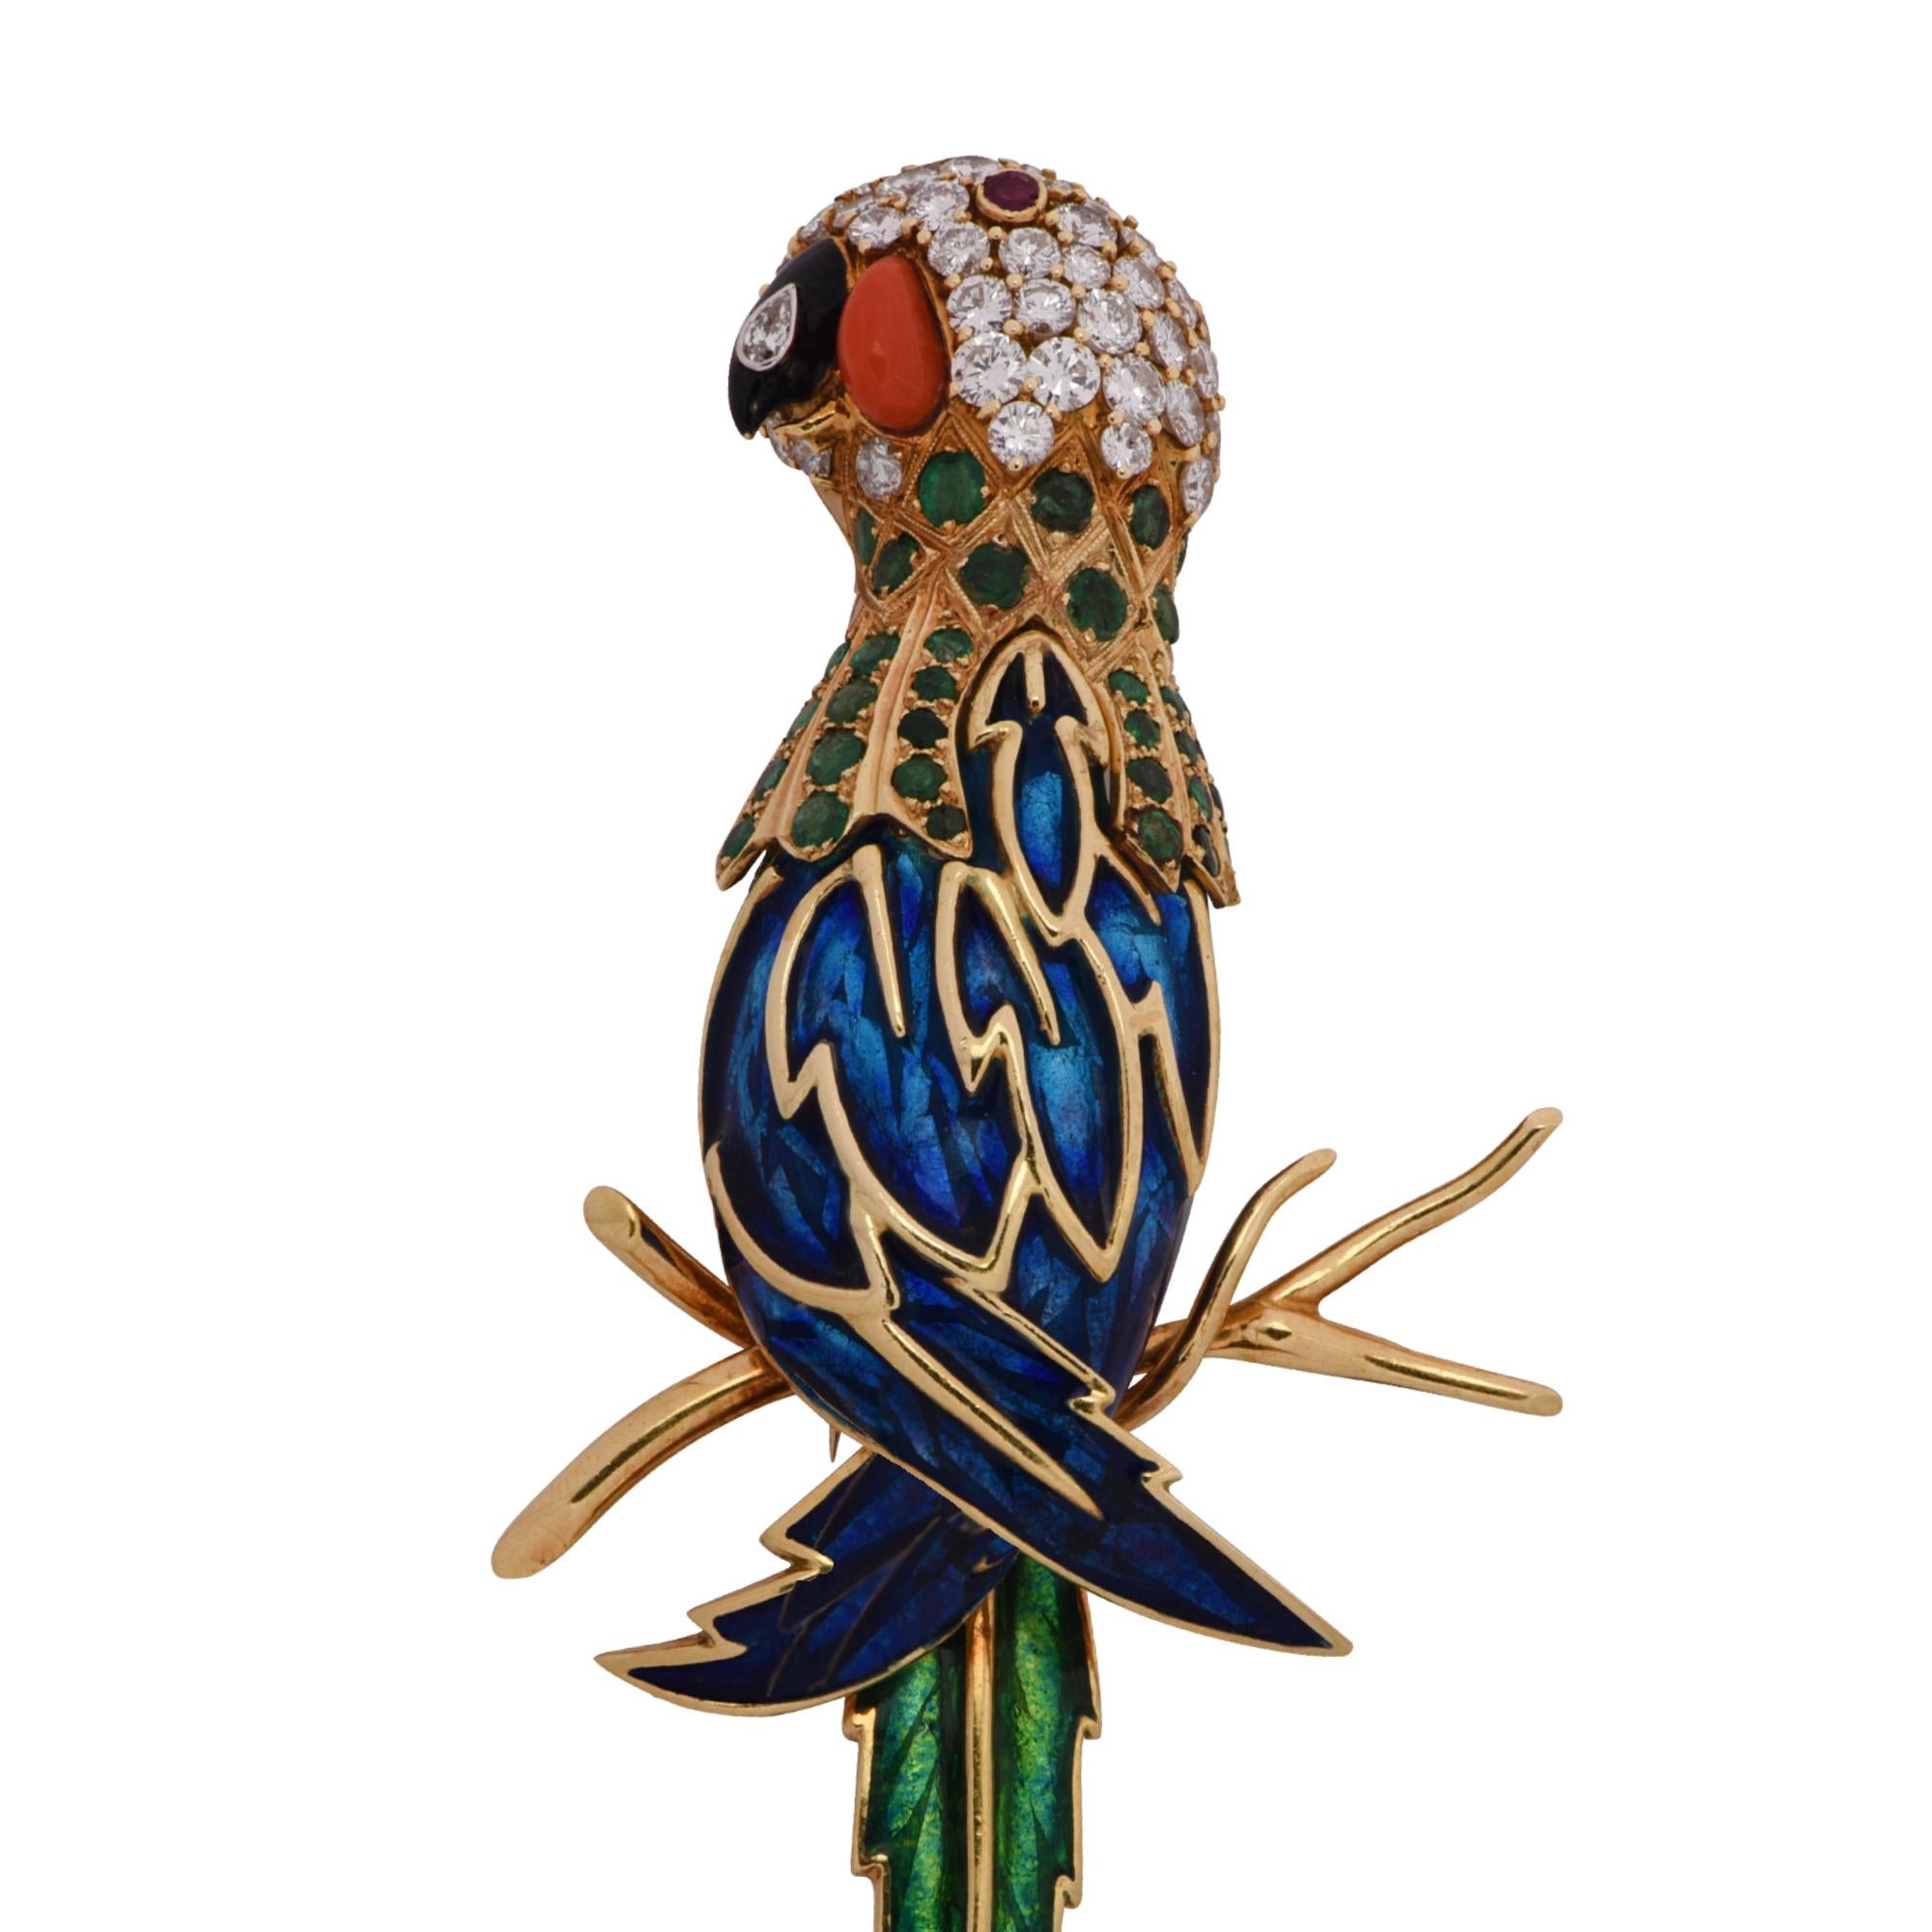 Round Cut Diamond, Emerald, Coral and Enamel Parrot Brooch Pin